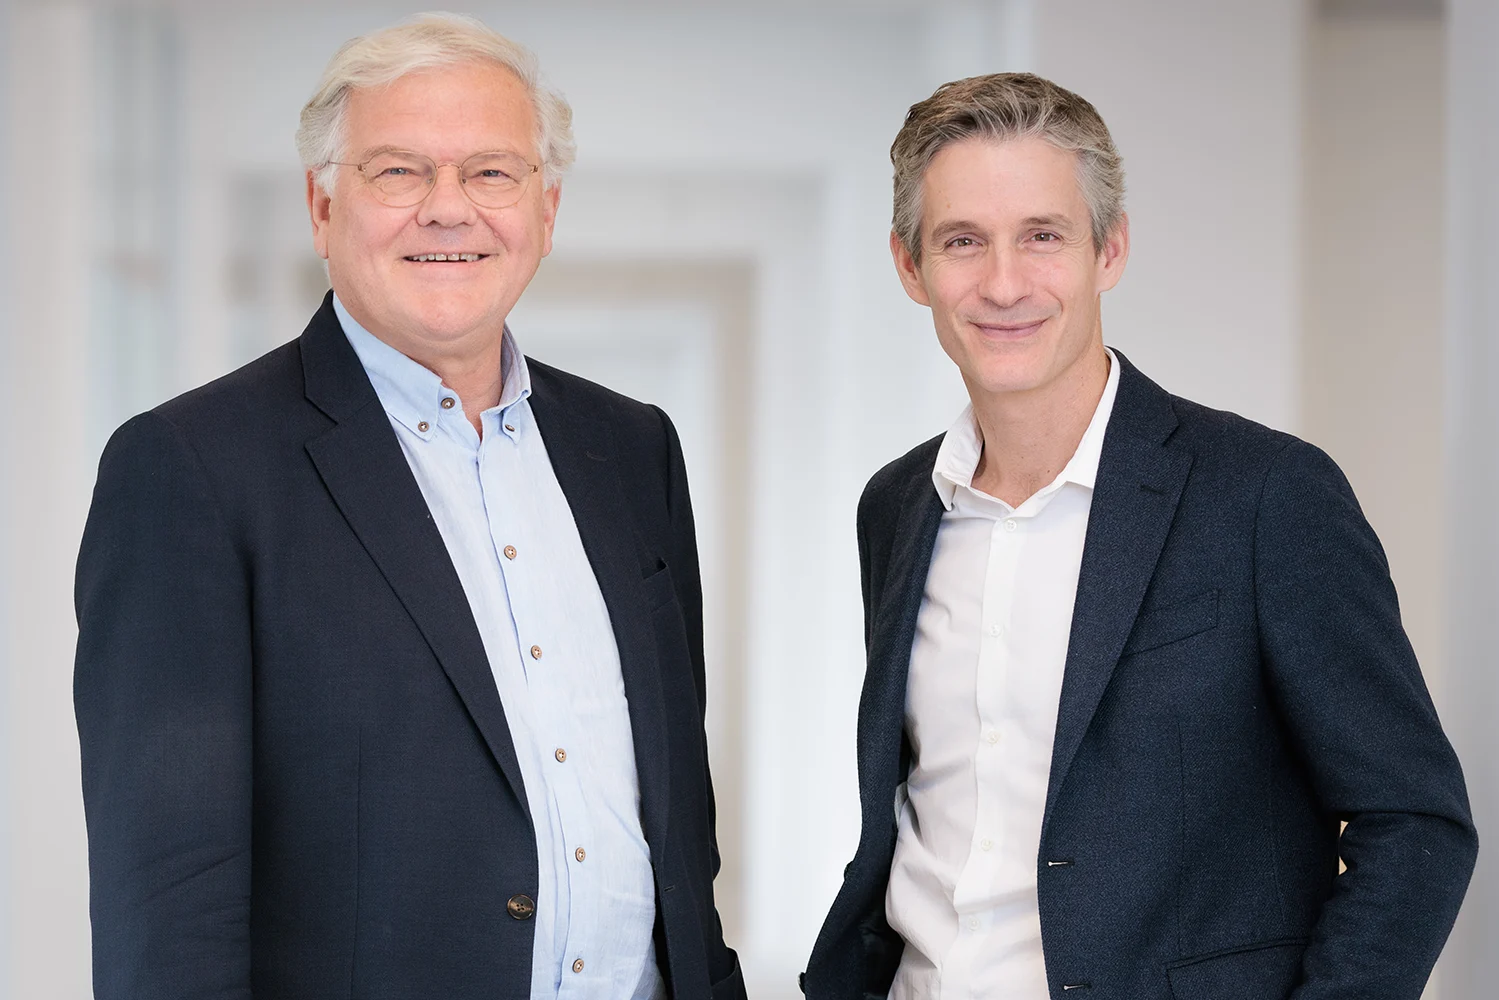 Chairman and ceo of Proximus stand side by side.